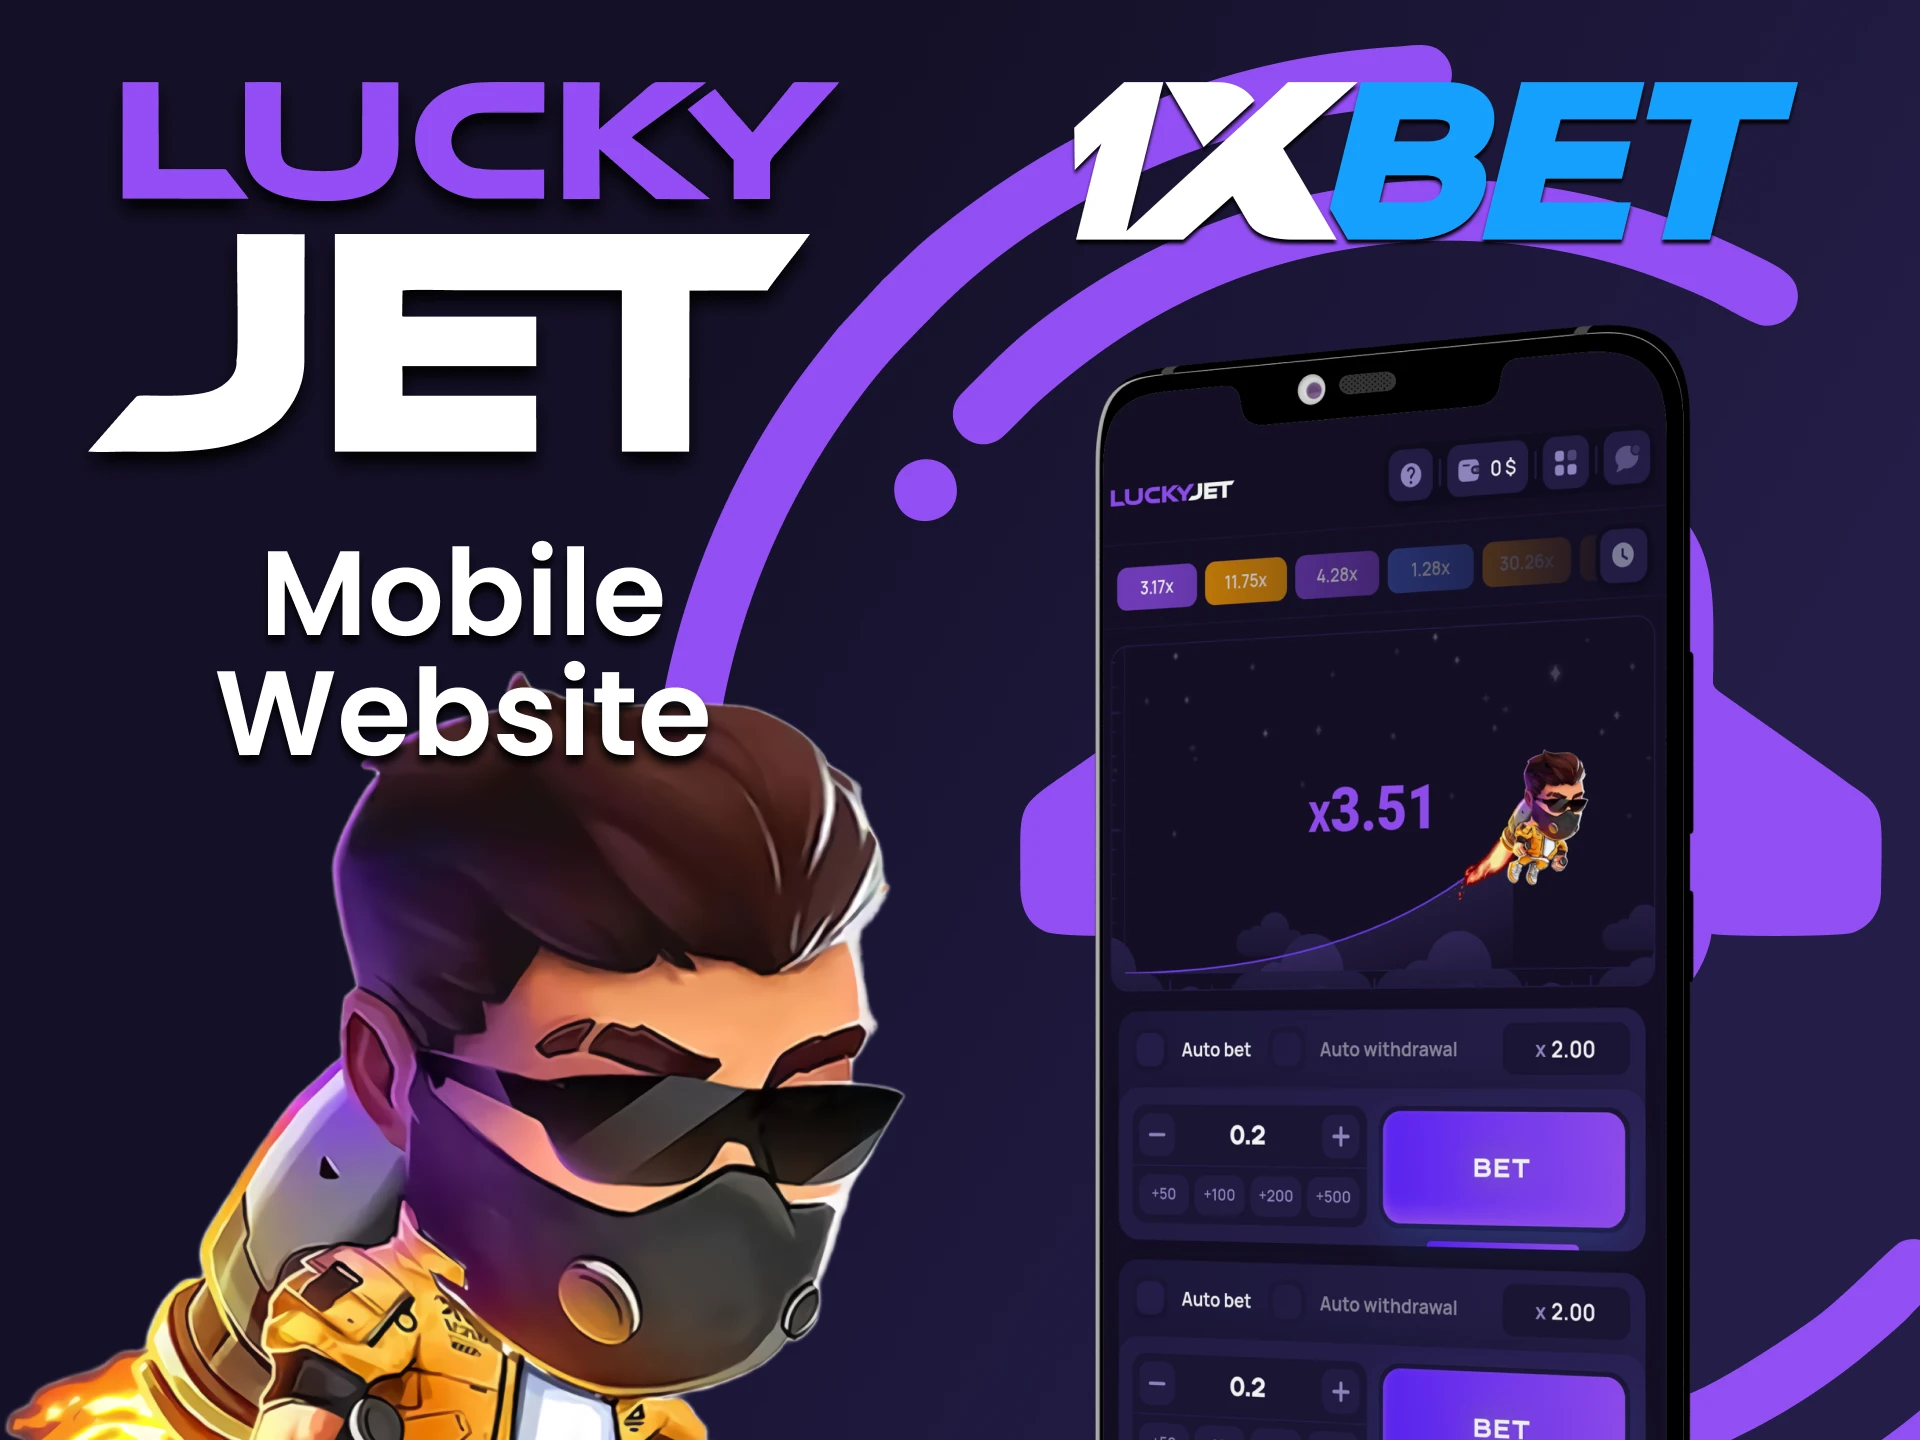 Using 1xbet on your phone you will be able to play Lucky Jet.